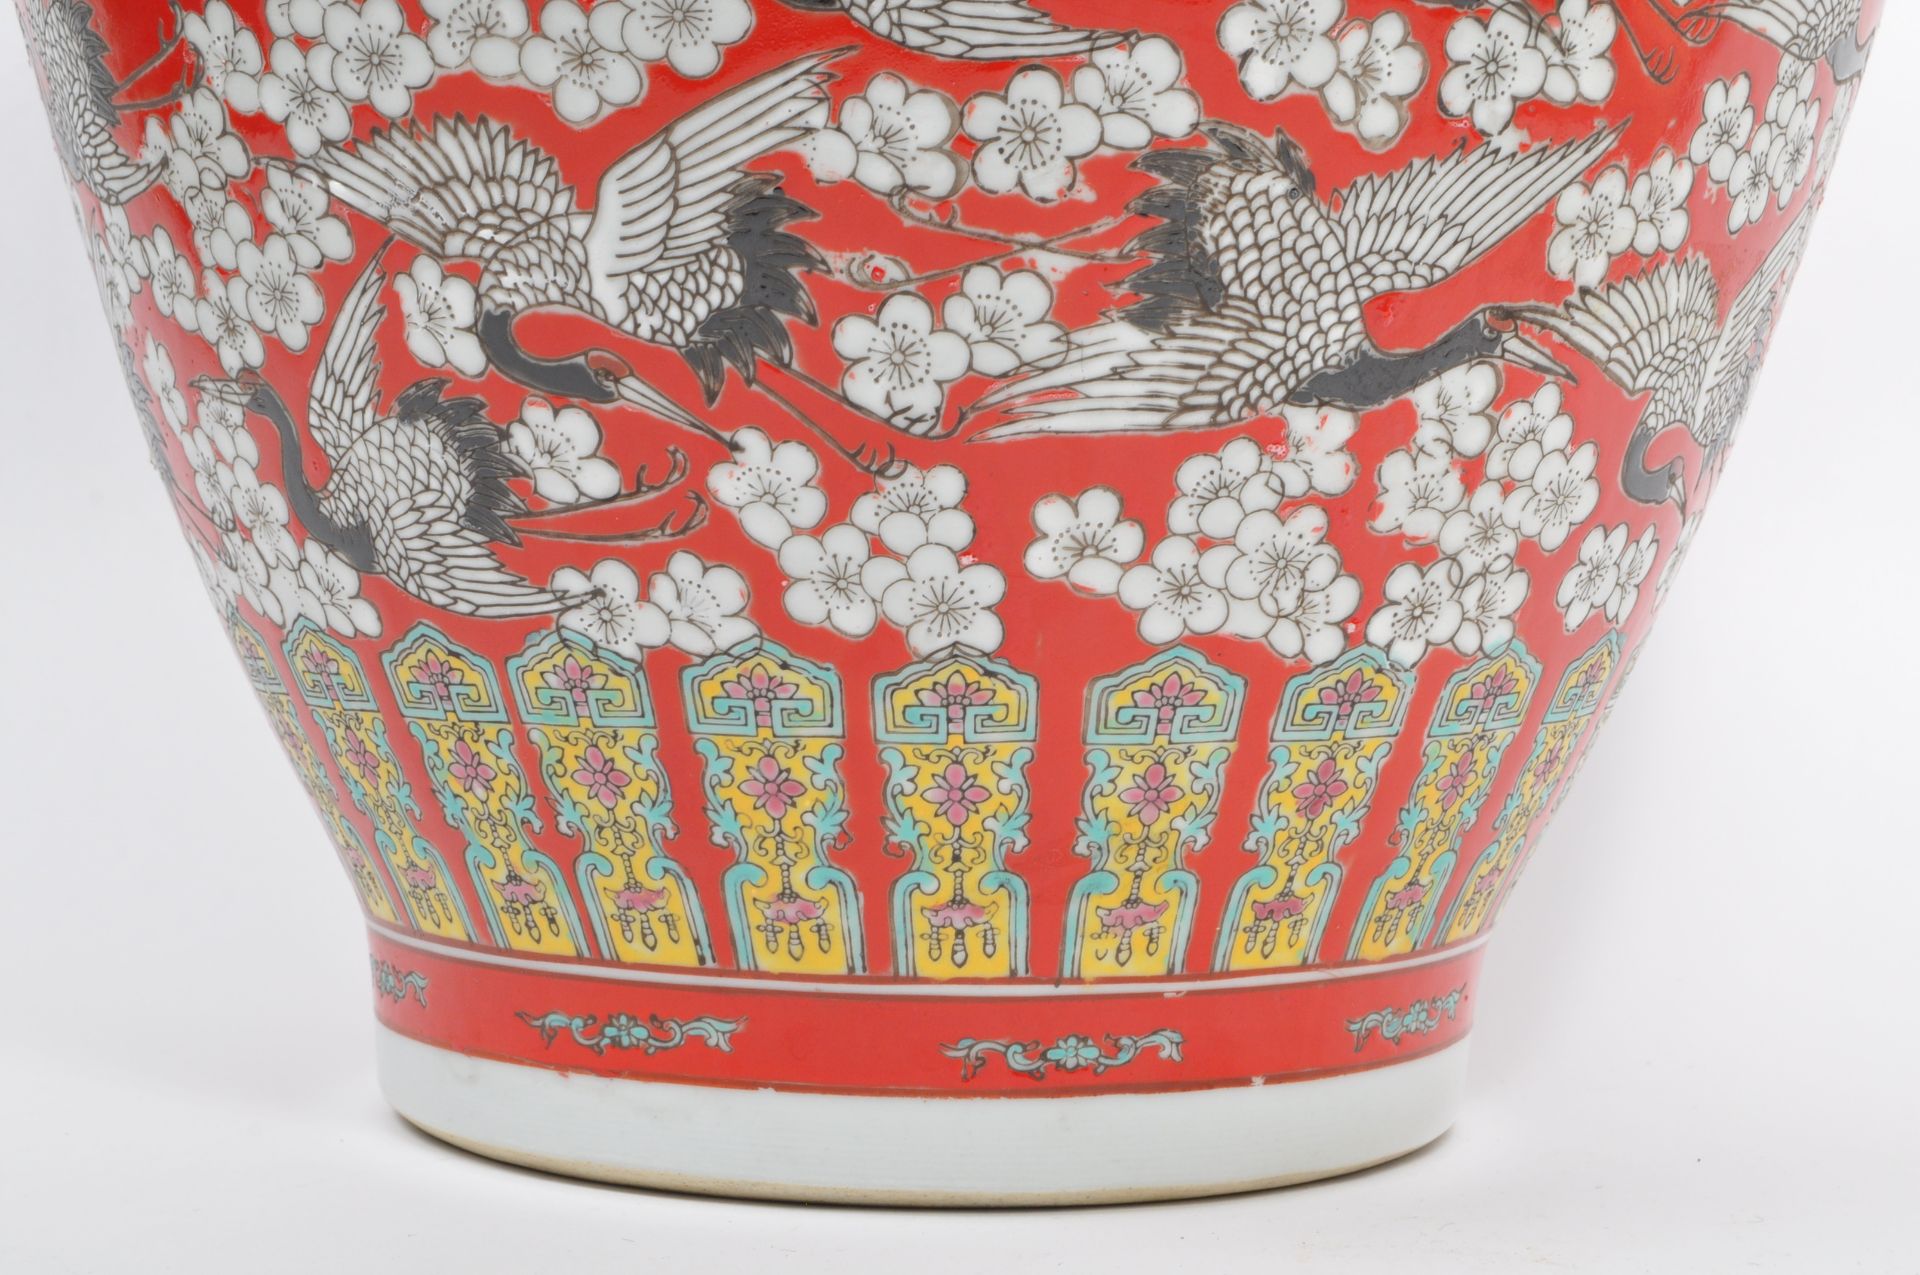 LARGE CHINESE VASE IN RED EMBELLISHED WITH CRANES & BLOSSOM - Image 4 of 6